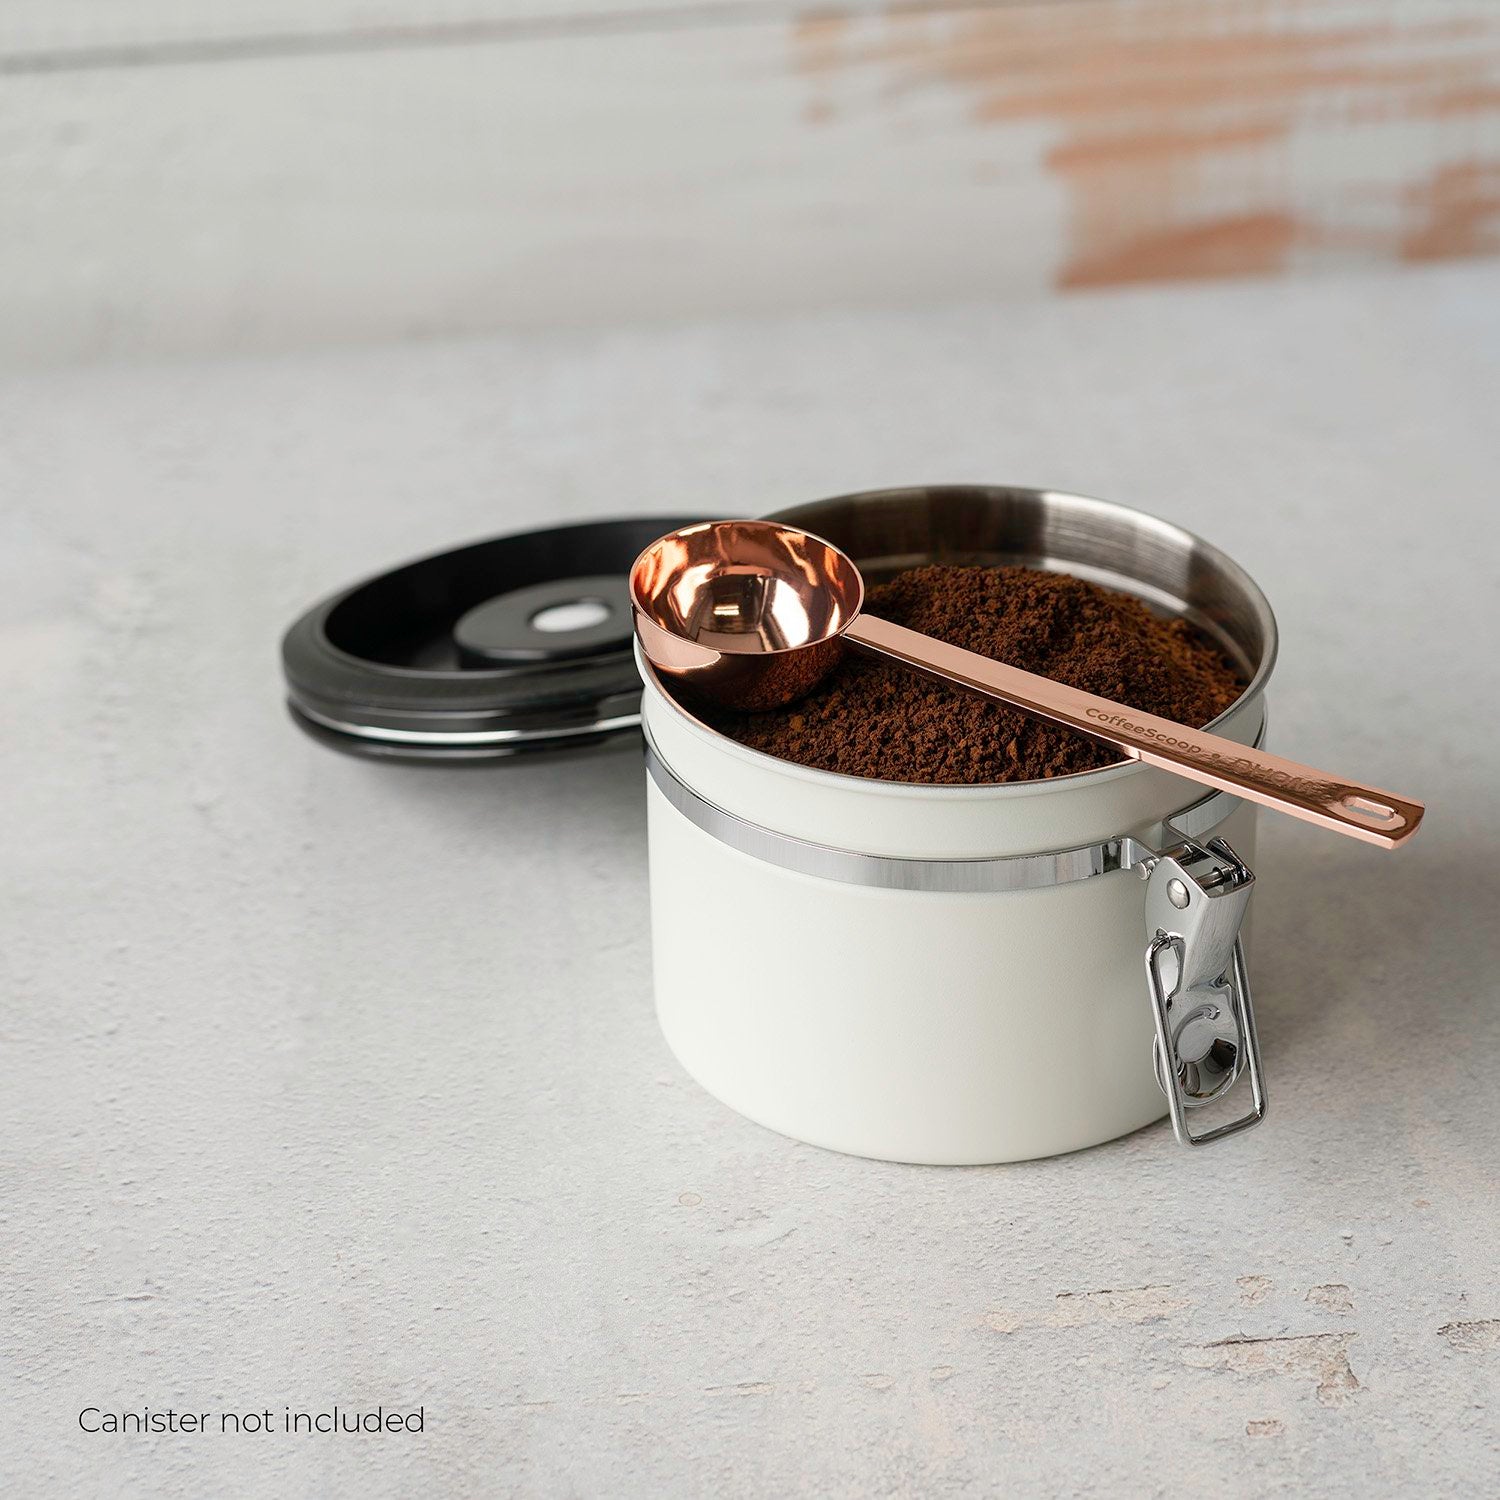 Coffee spoon on coffee canister 